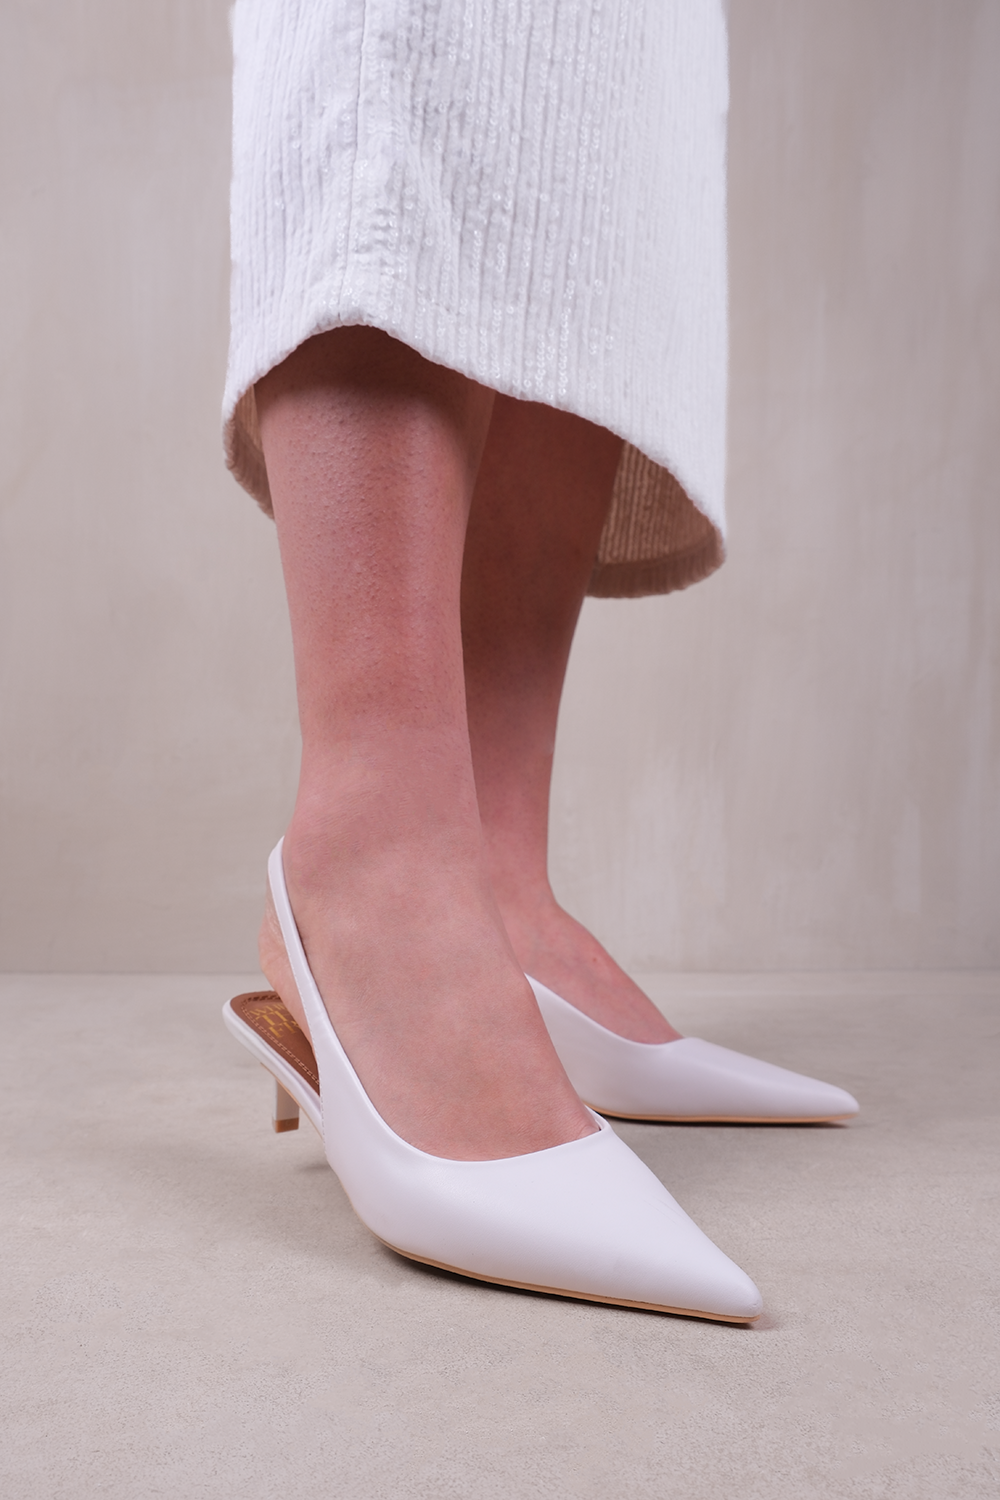 NEW FORM LOW KITTEN HEELS WITH POINTED TOE & ELASTIC SLINGBACK IN WHITE FAUX LEATHER